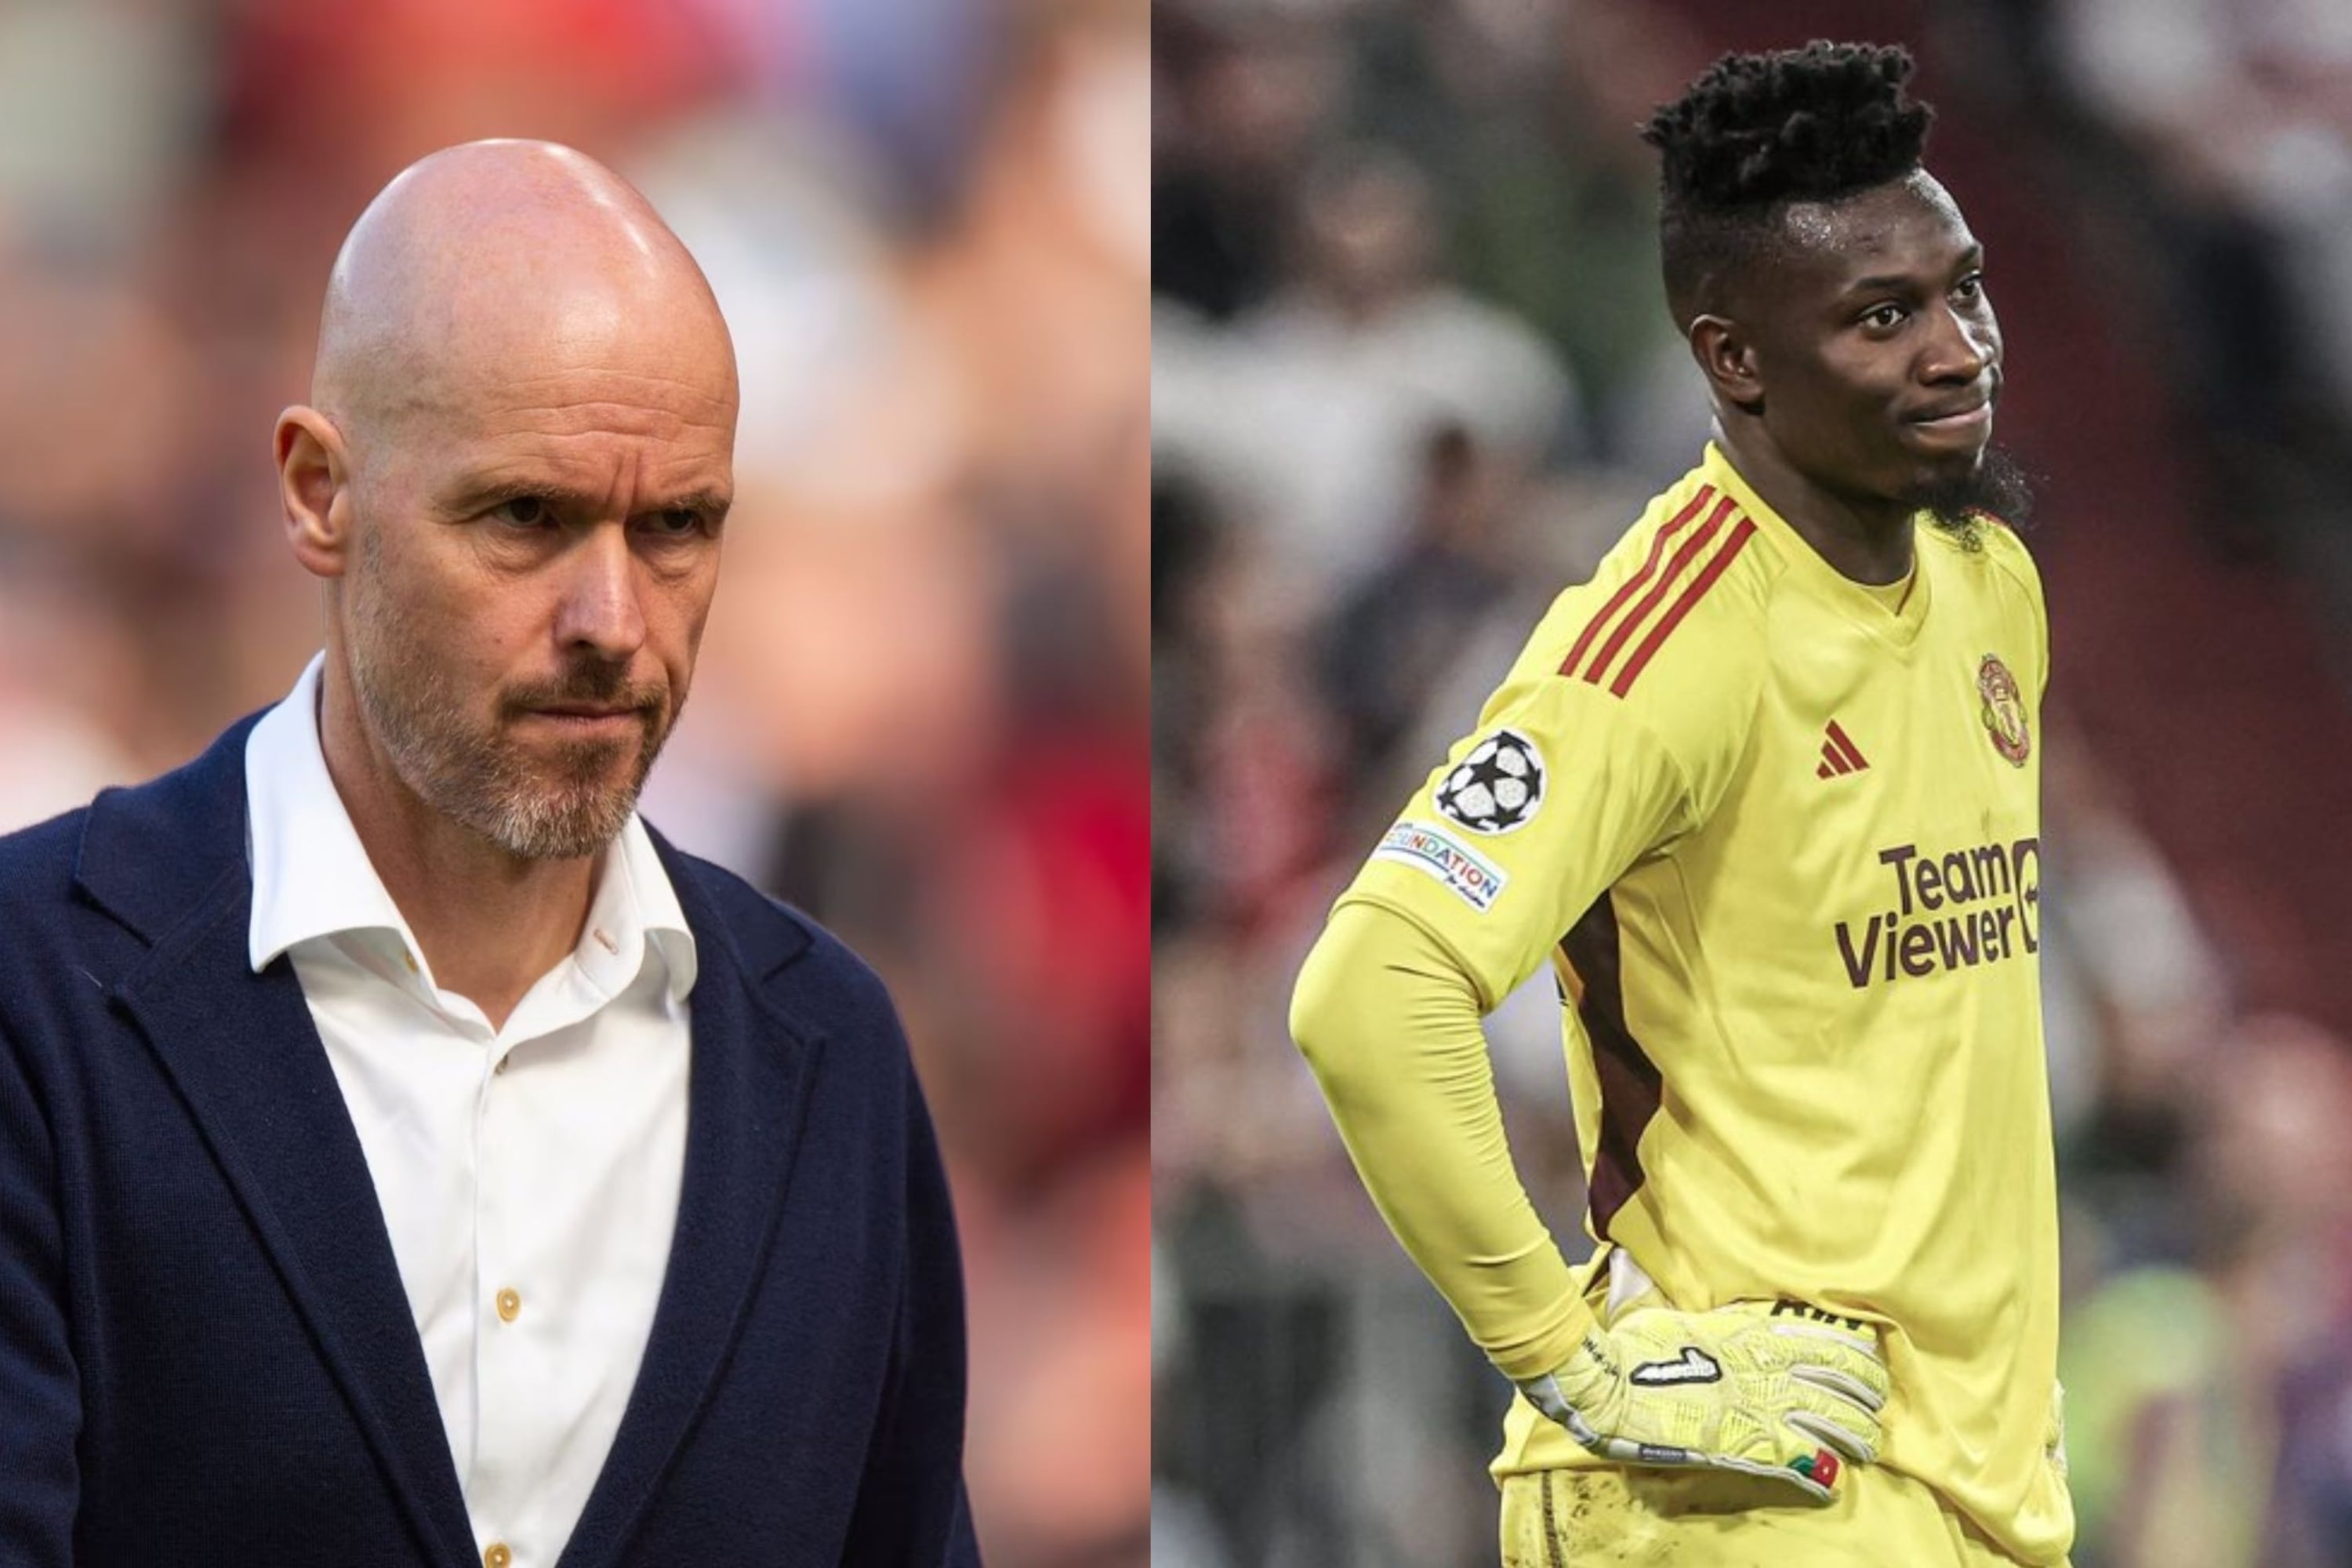 After Onana's mistakes, Ten Hag's words about the goalkeeper